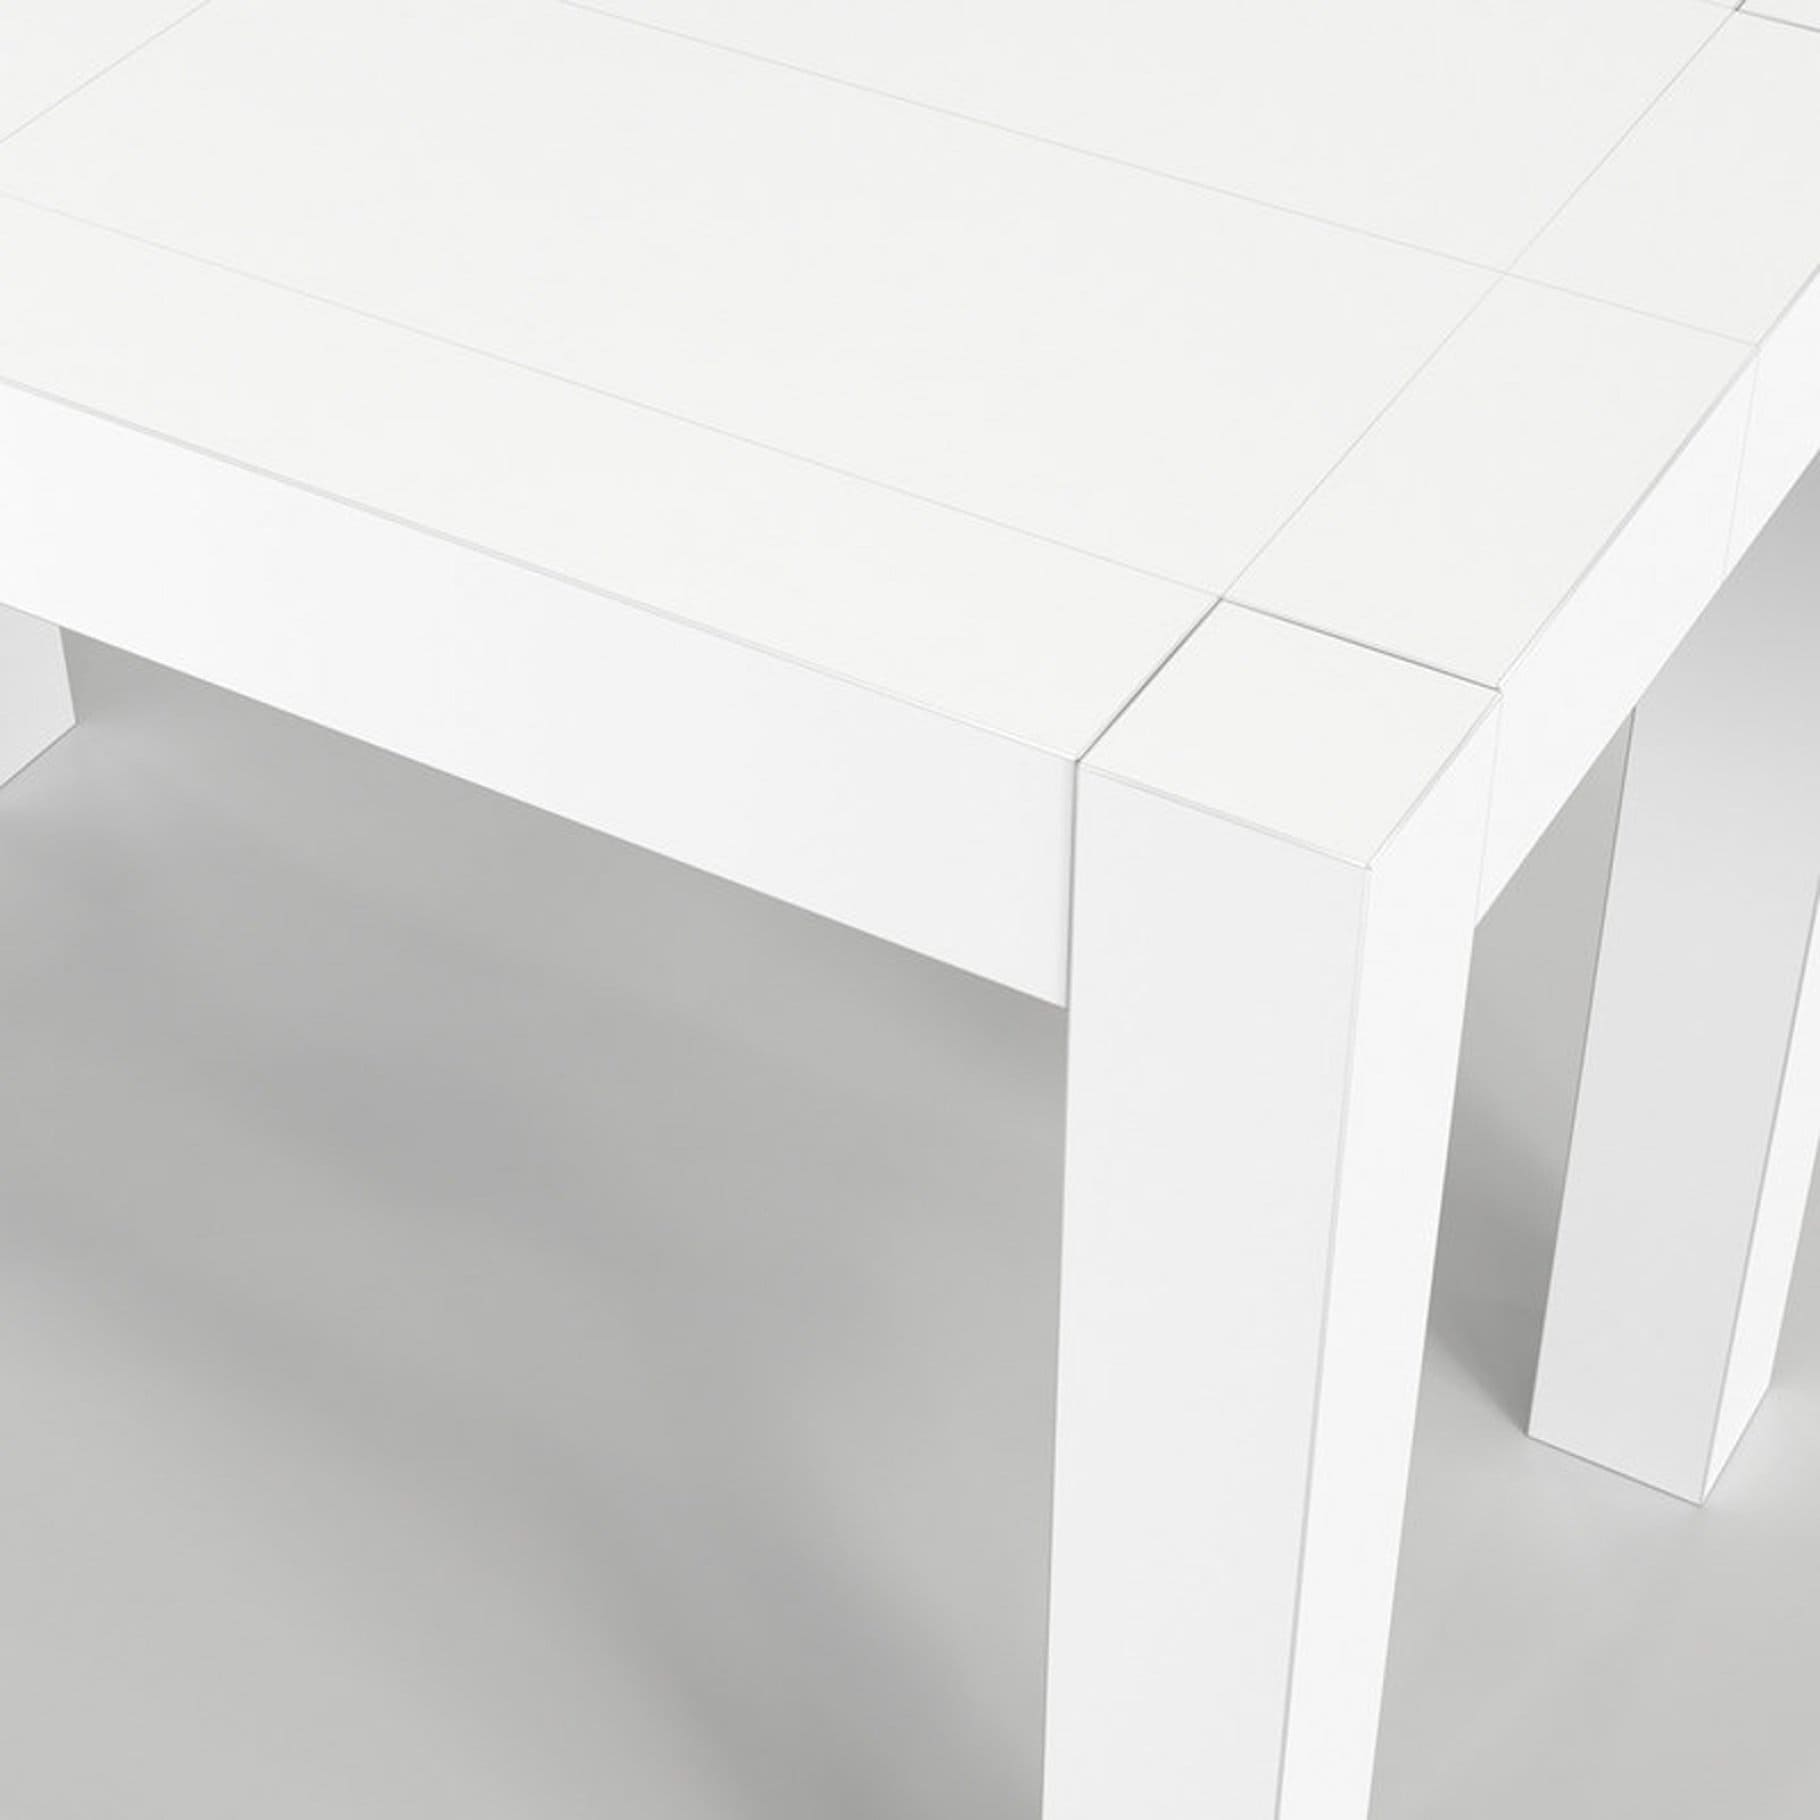 A close-up of the leg of the 3D model of the table.